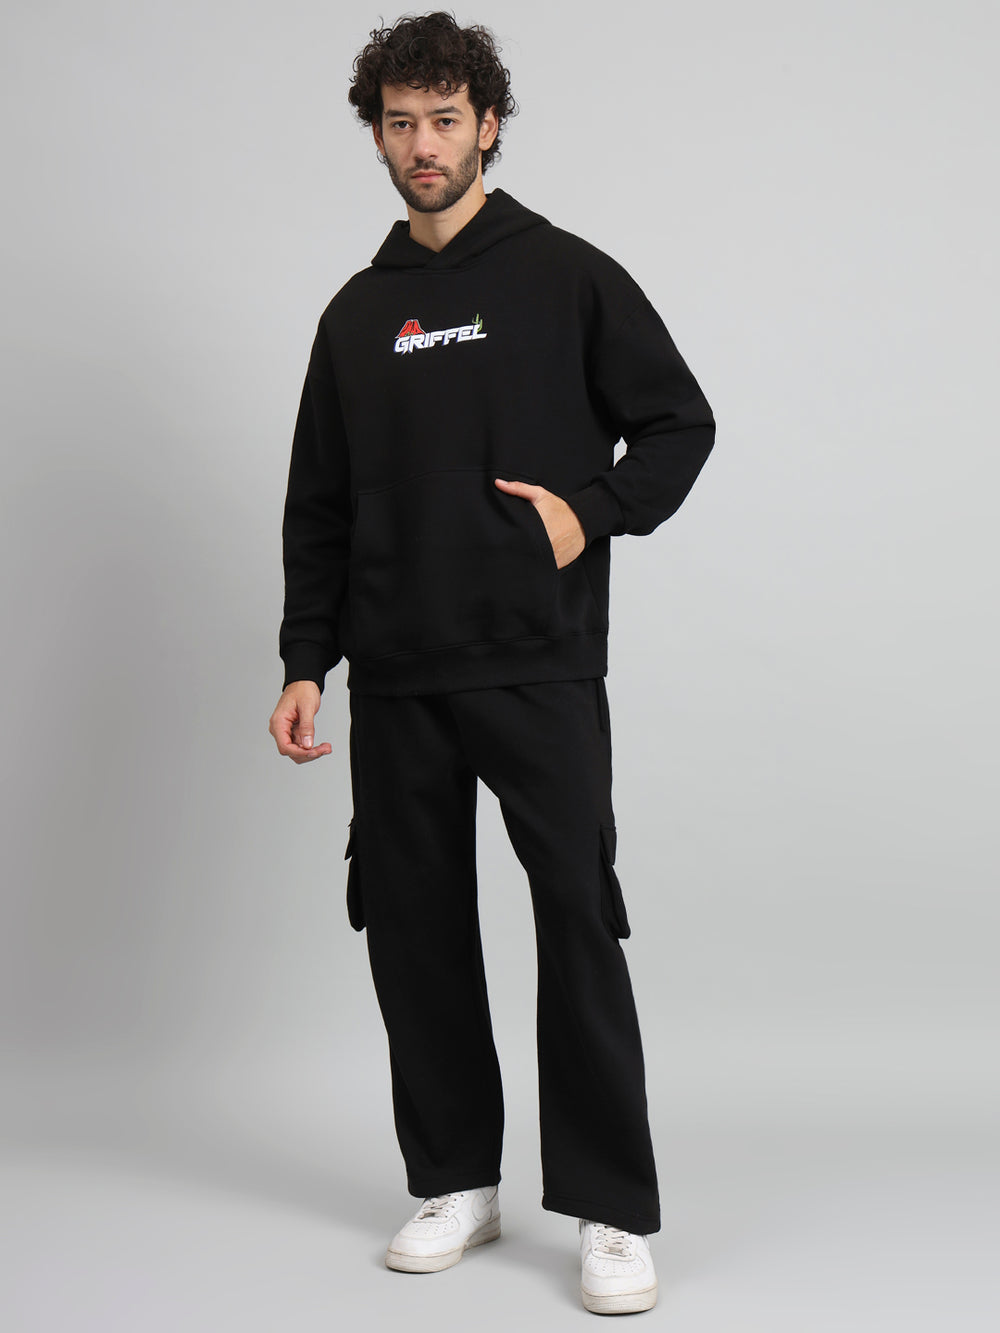 Griffel Men Oversized Fit Back Print 100% Cotton Fleece Black Hoodie and trackpant - griffel